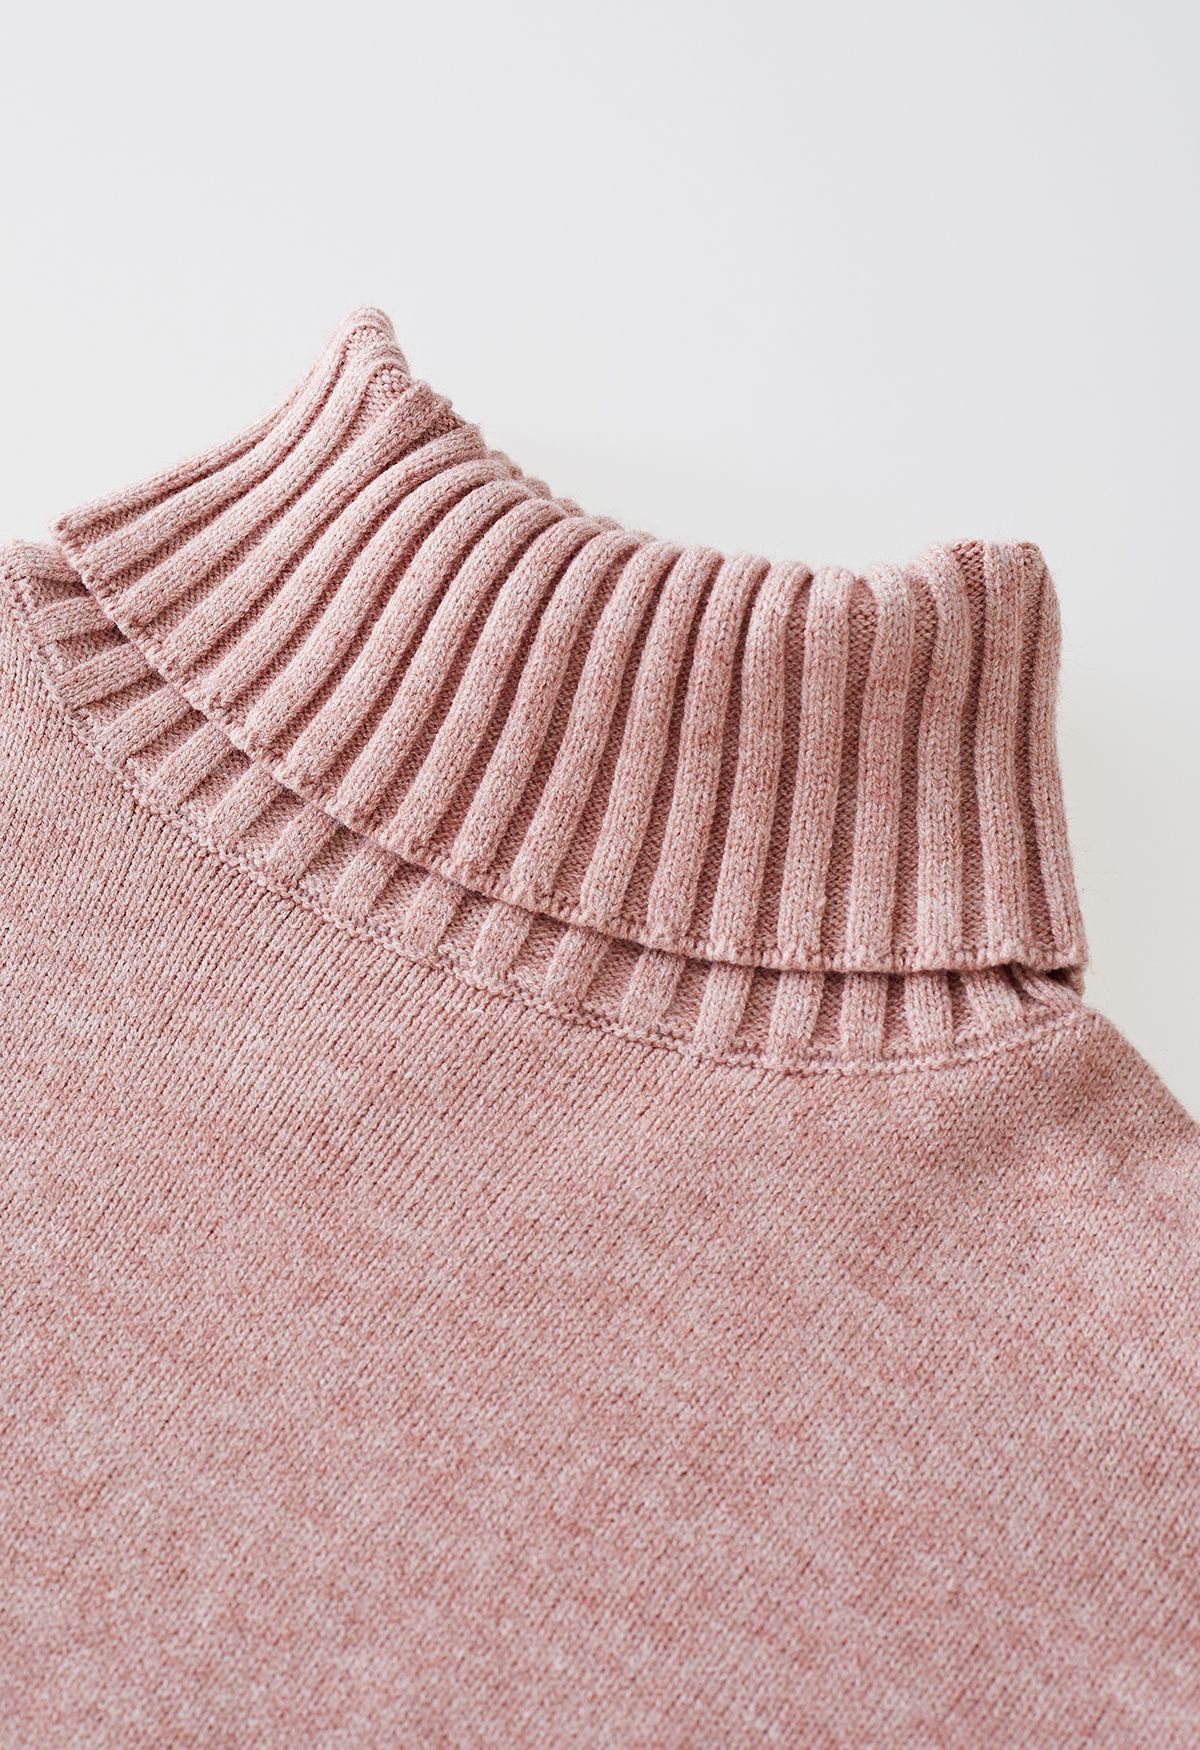 Turtleneck Hi-Lo Sweater and Knit Pants Set in Pink - Retro, Indie and ...